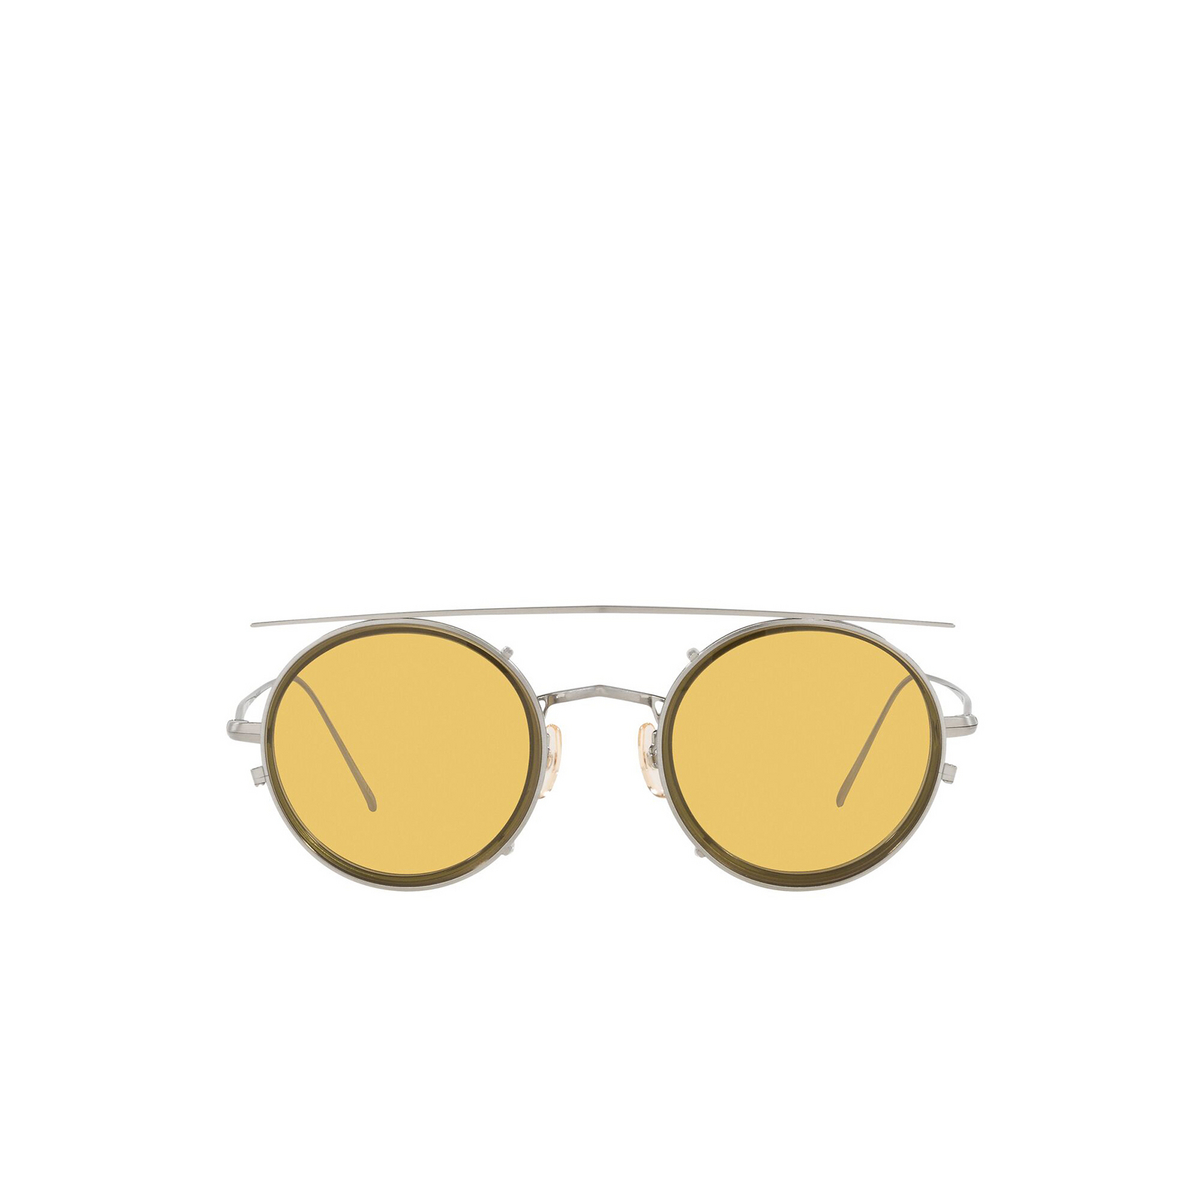 Oliver Peoples® Round Sunglasses: G. Ponti-2 OV1292T color Brushed Chrome 5254 - front view.